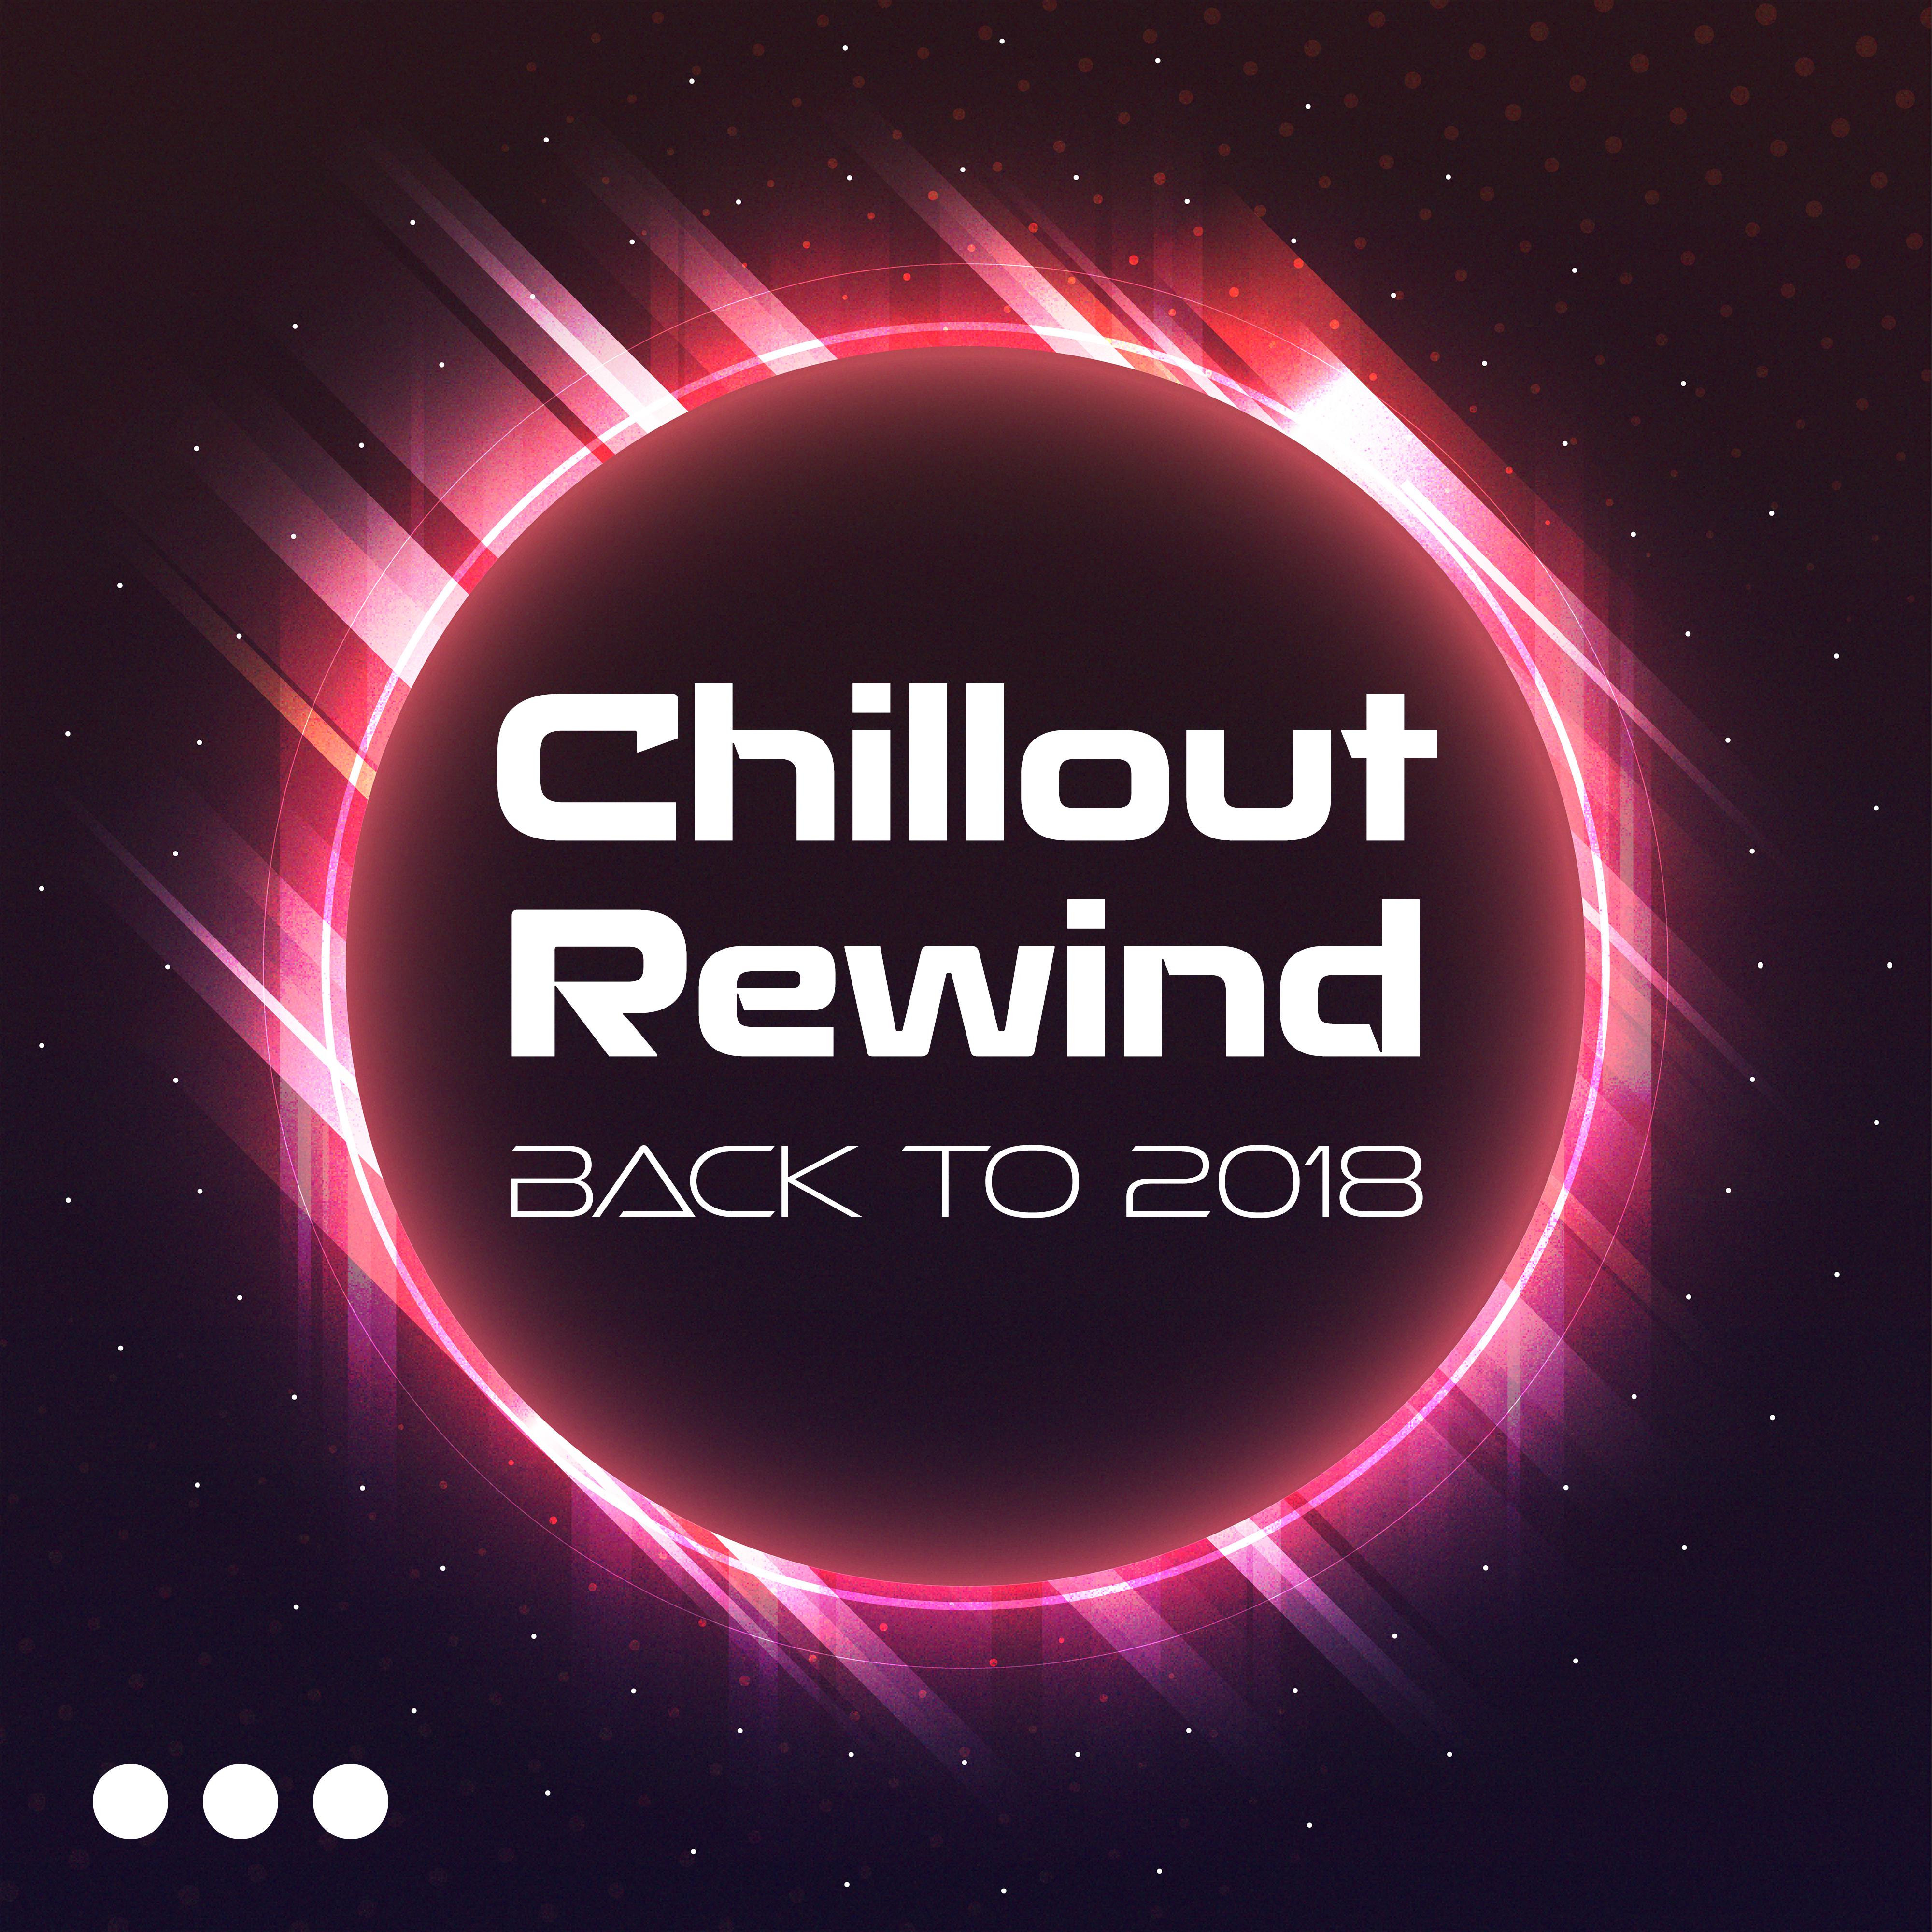 Chillout Rewind: Back to 2018